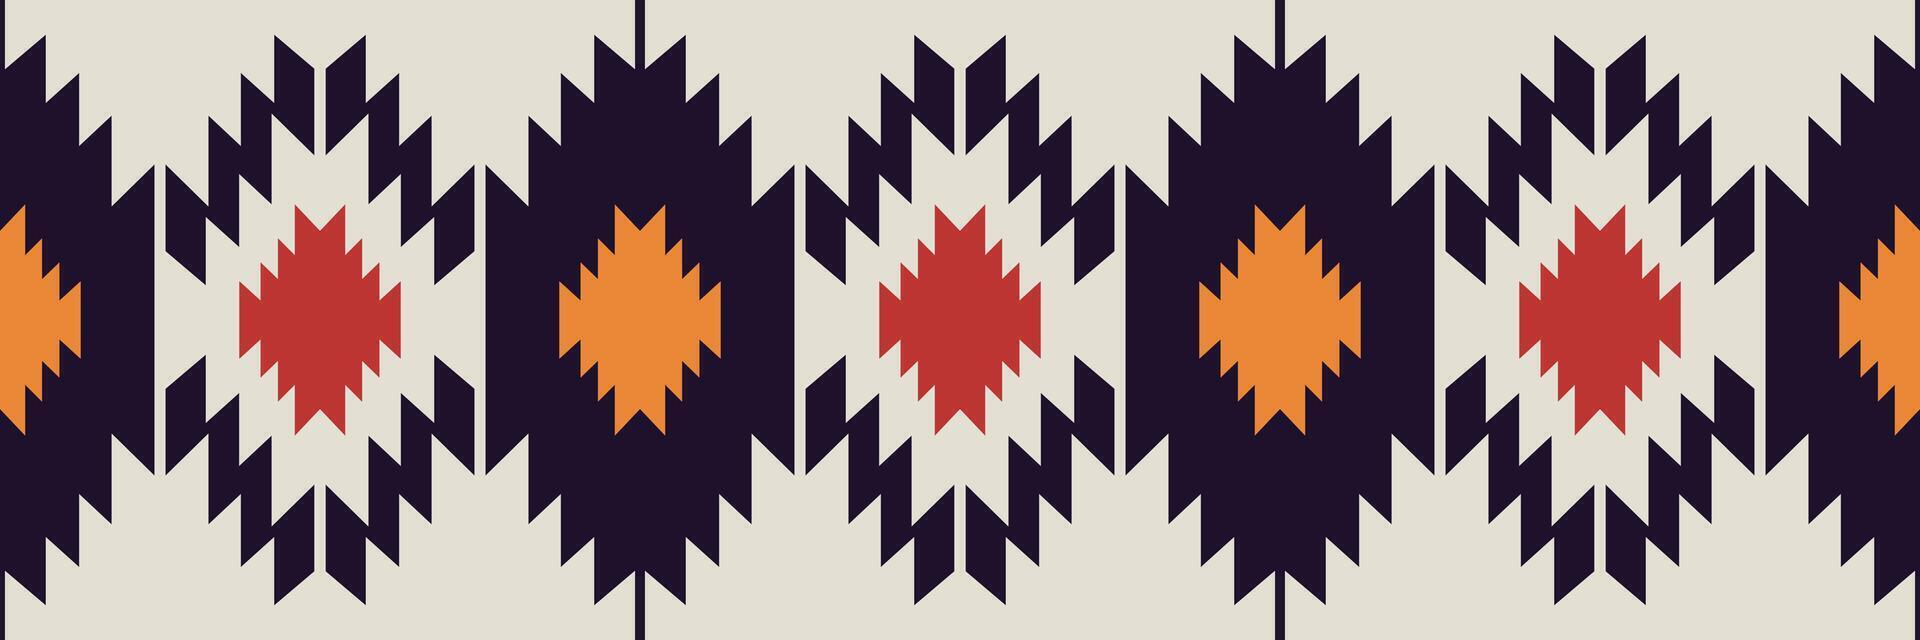 Aztec southwest colorful border pattern. Colorful native American southwestern geometric runner rug seamless pattern. Ethnic pattern use for textile border, table runner, tablecloth, floor rug. vector